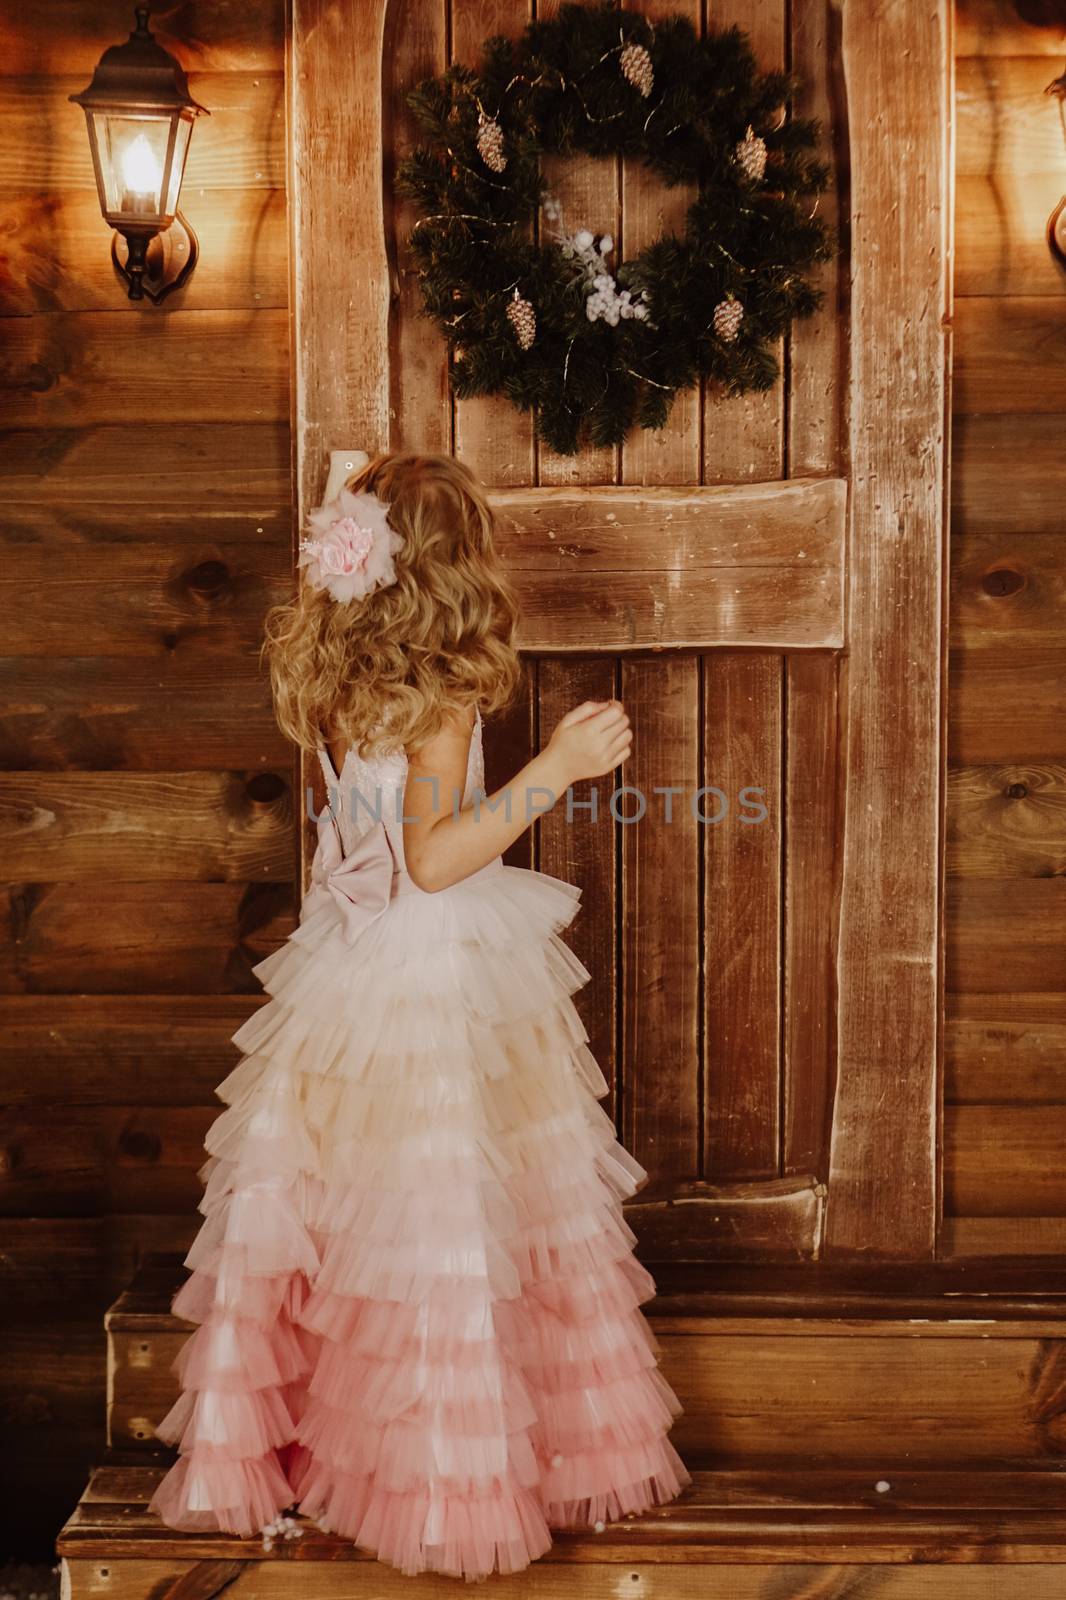 Little girl in pink dress stands in front of wooden door with Christmas wreath by natali_brill